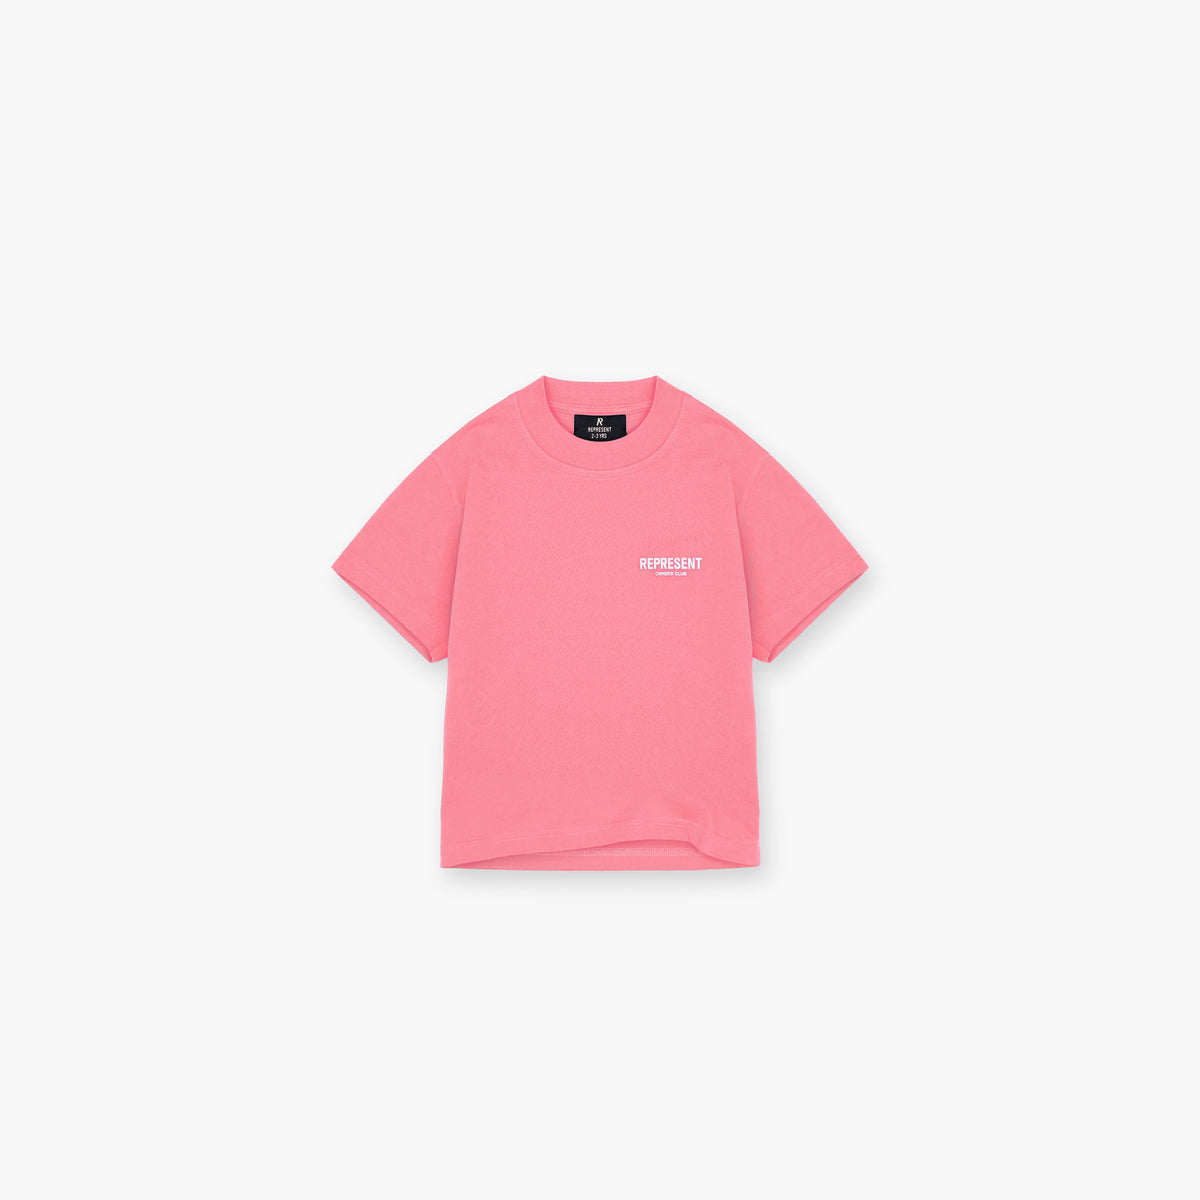 Owners' Club Kids T-Shirt | Pink | REPRESENT CLO